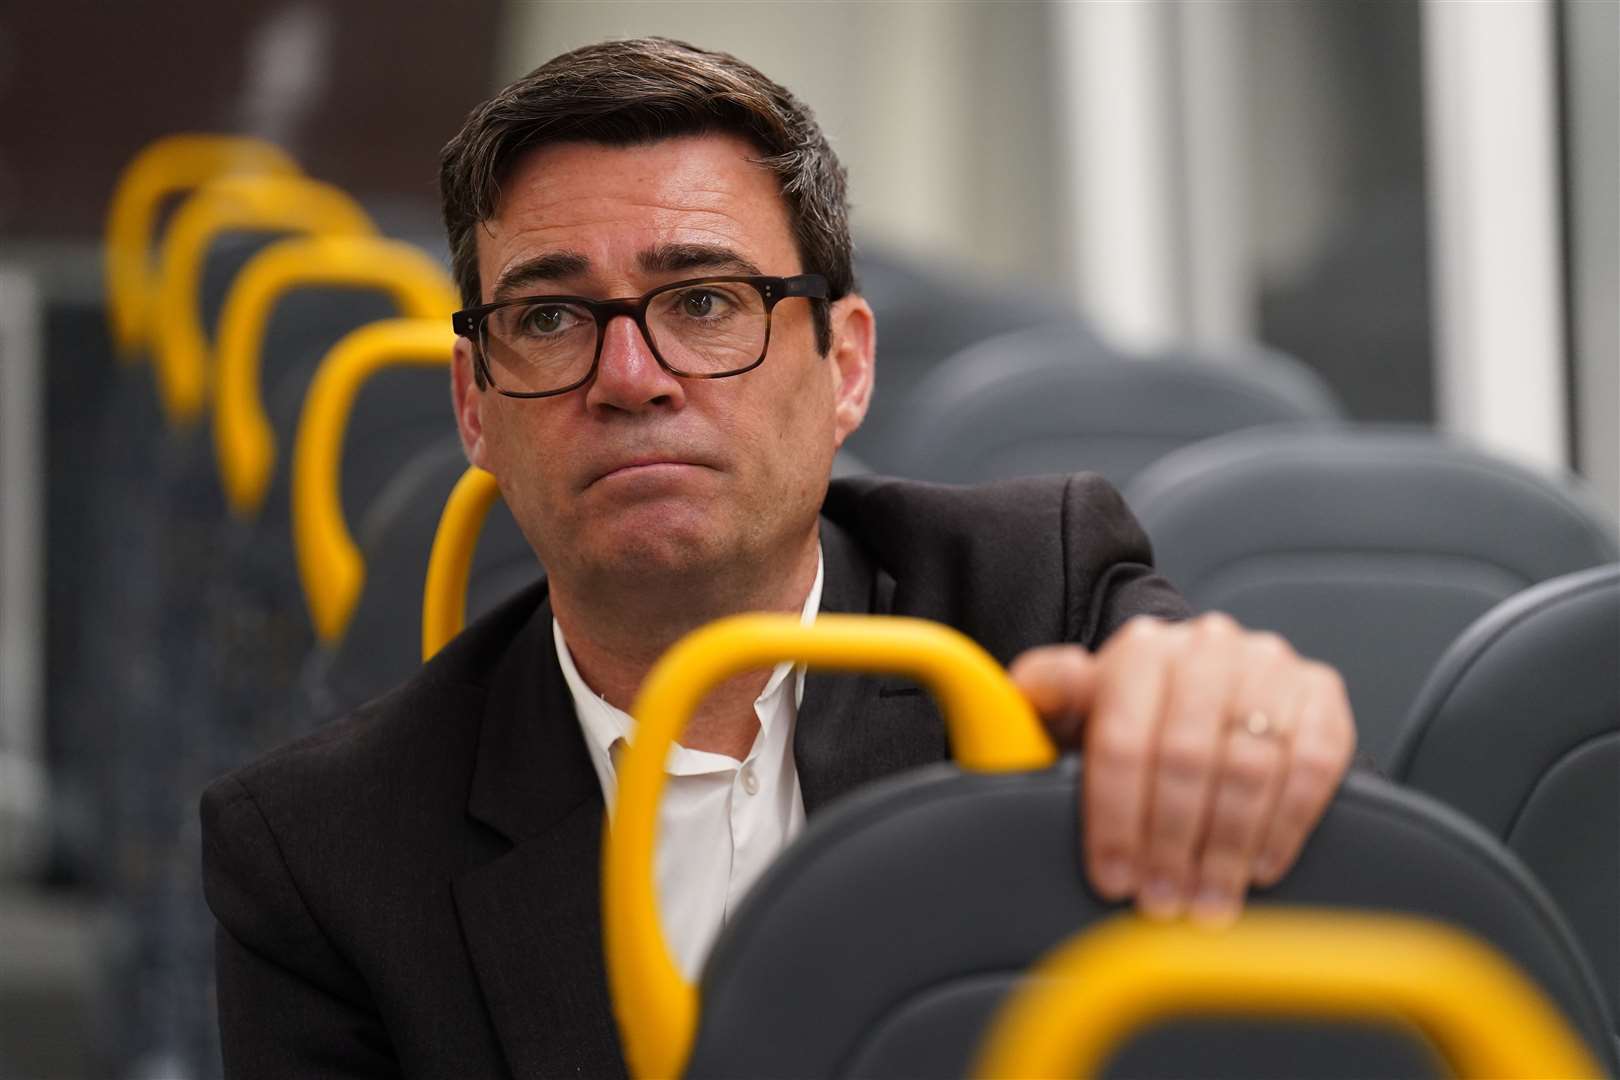 Andy Burnham was speaking on a visit to Scotland to see ‘Bee Network’ buses for his region (Andrew Milligan/PA)